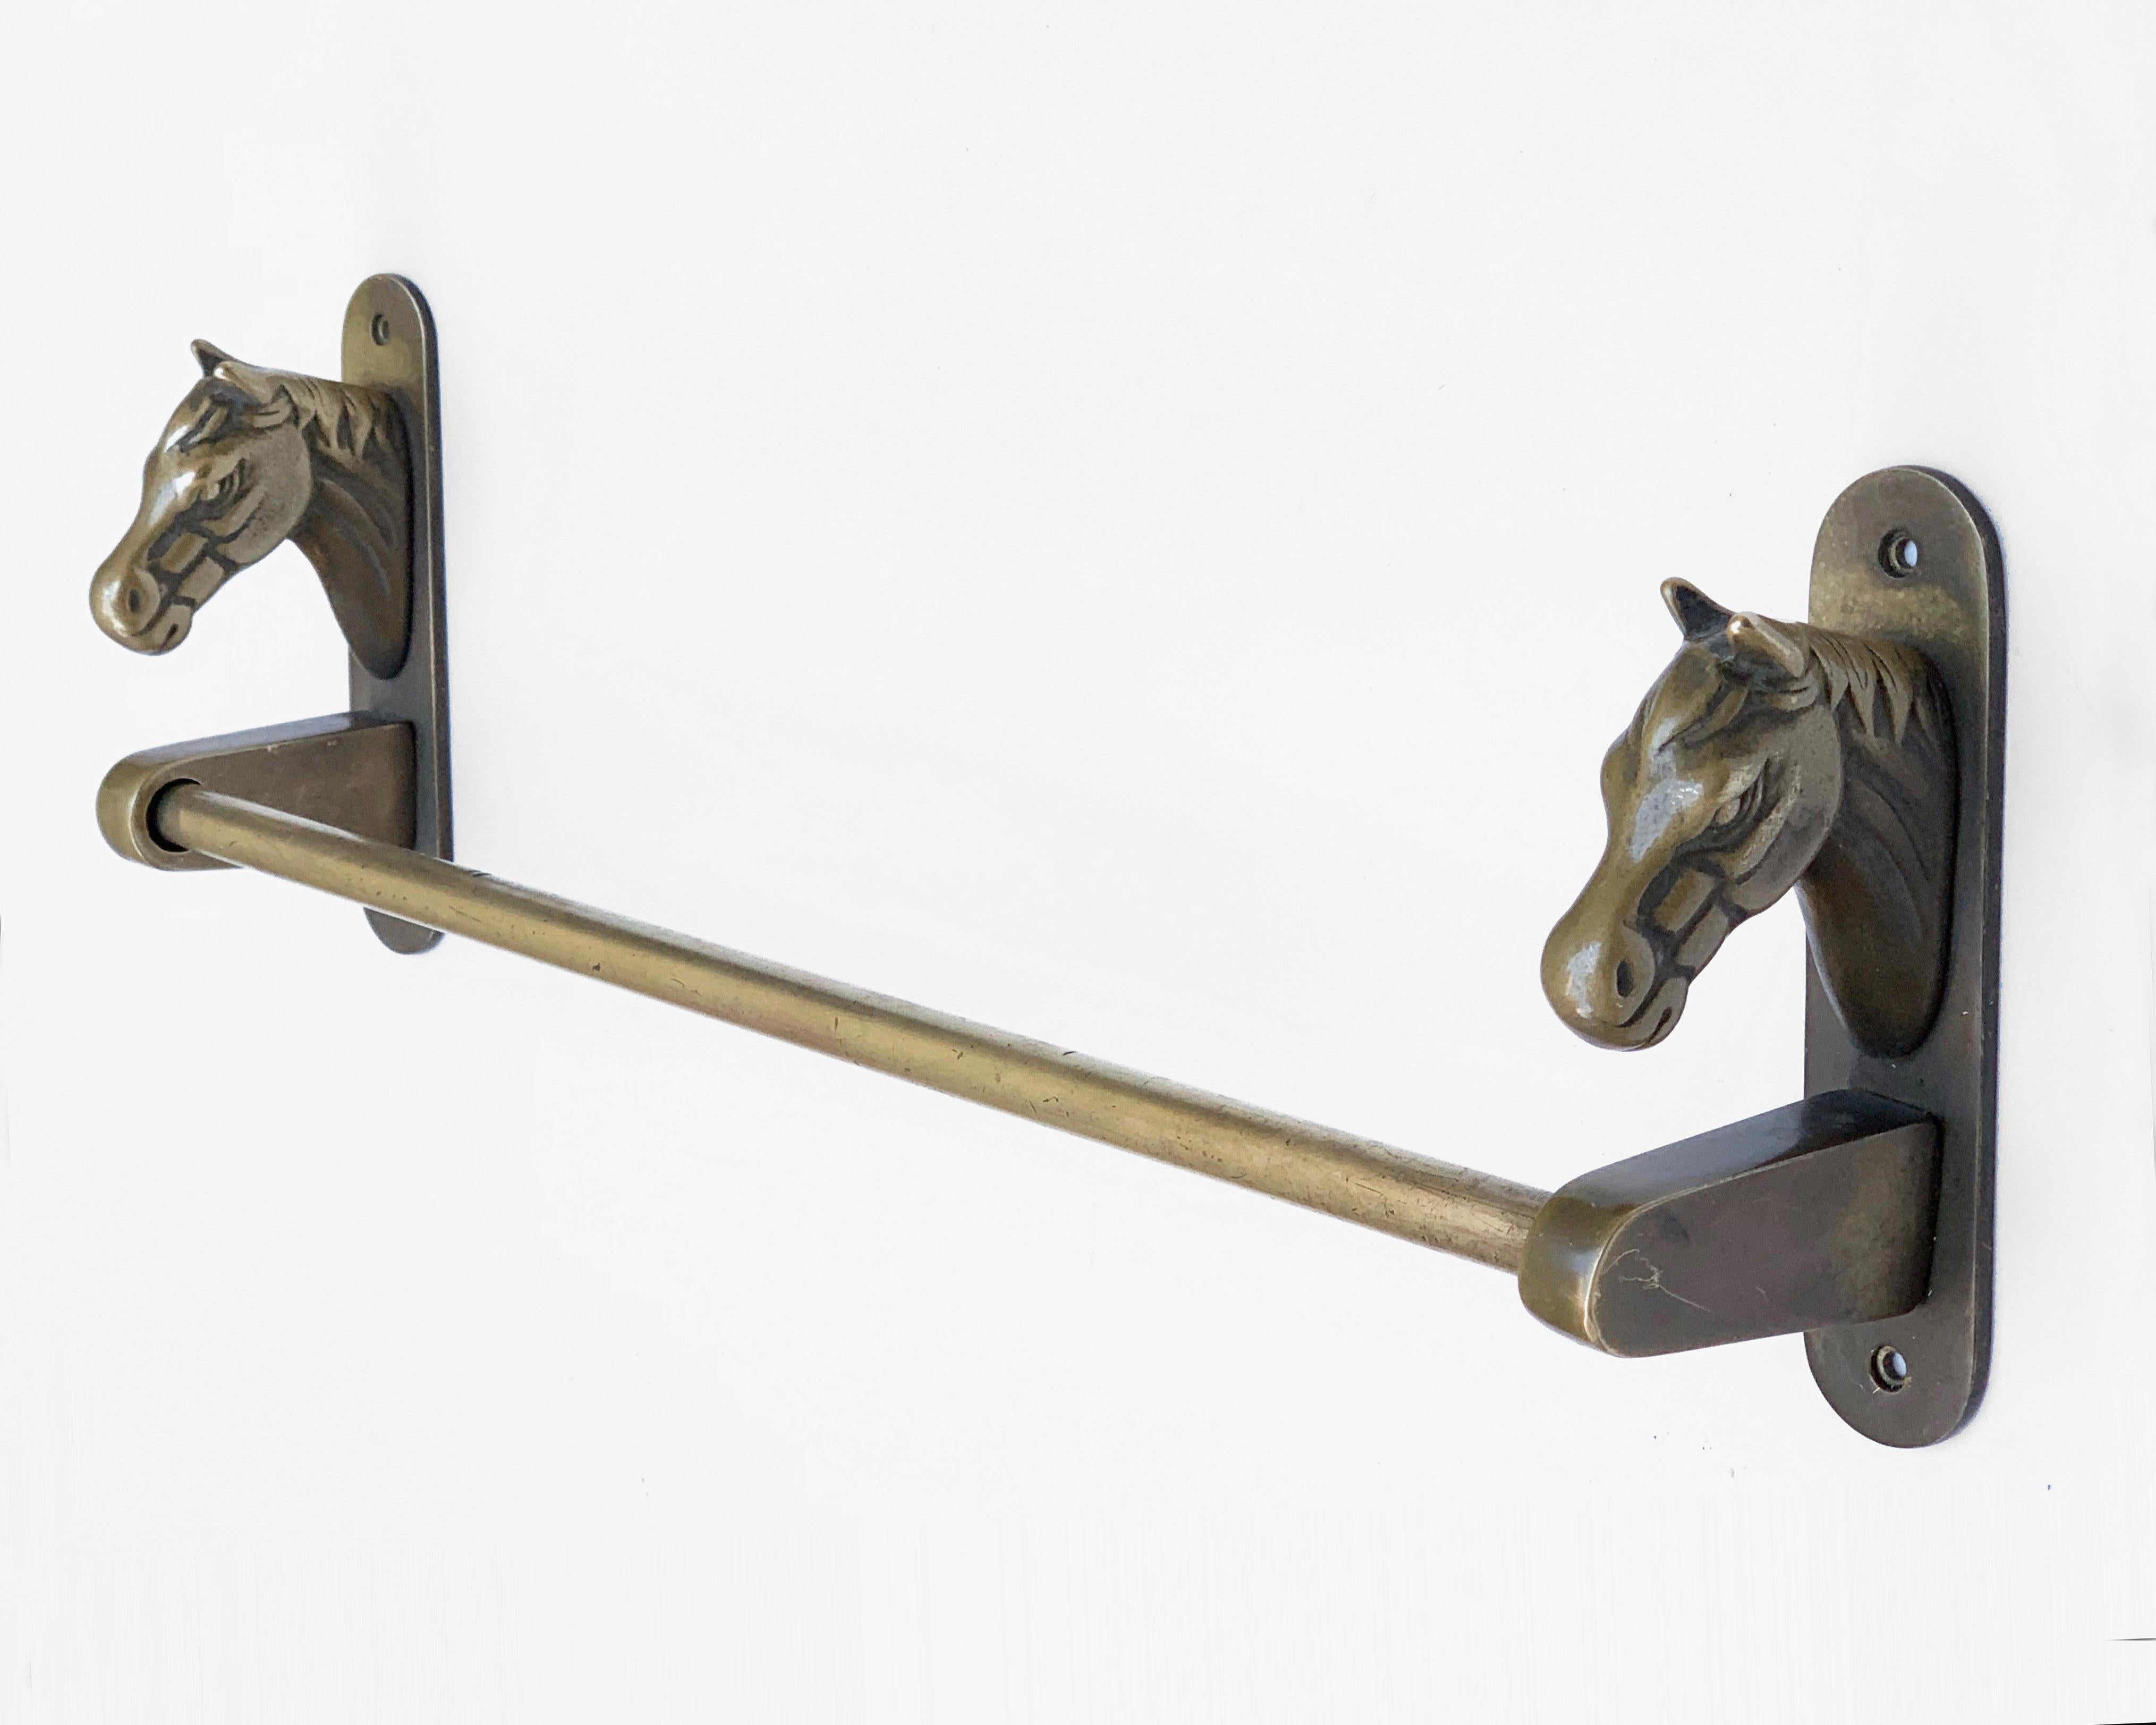 20th Century Midcentury Solid Brass Italian Towel Holder with Horse Heads, 1950s For Sale